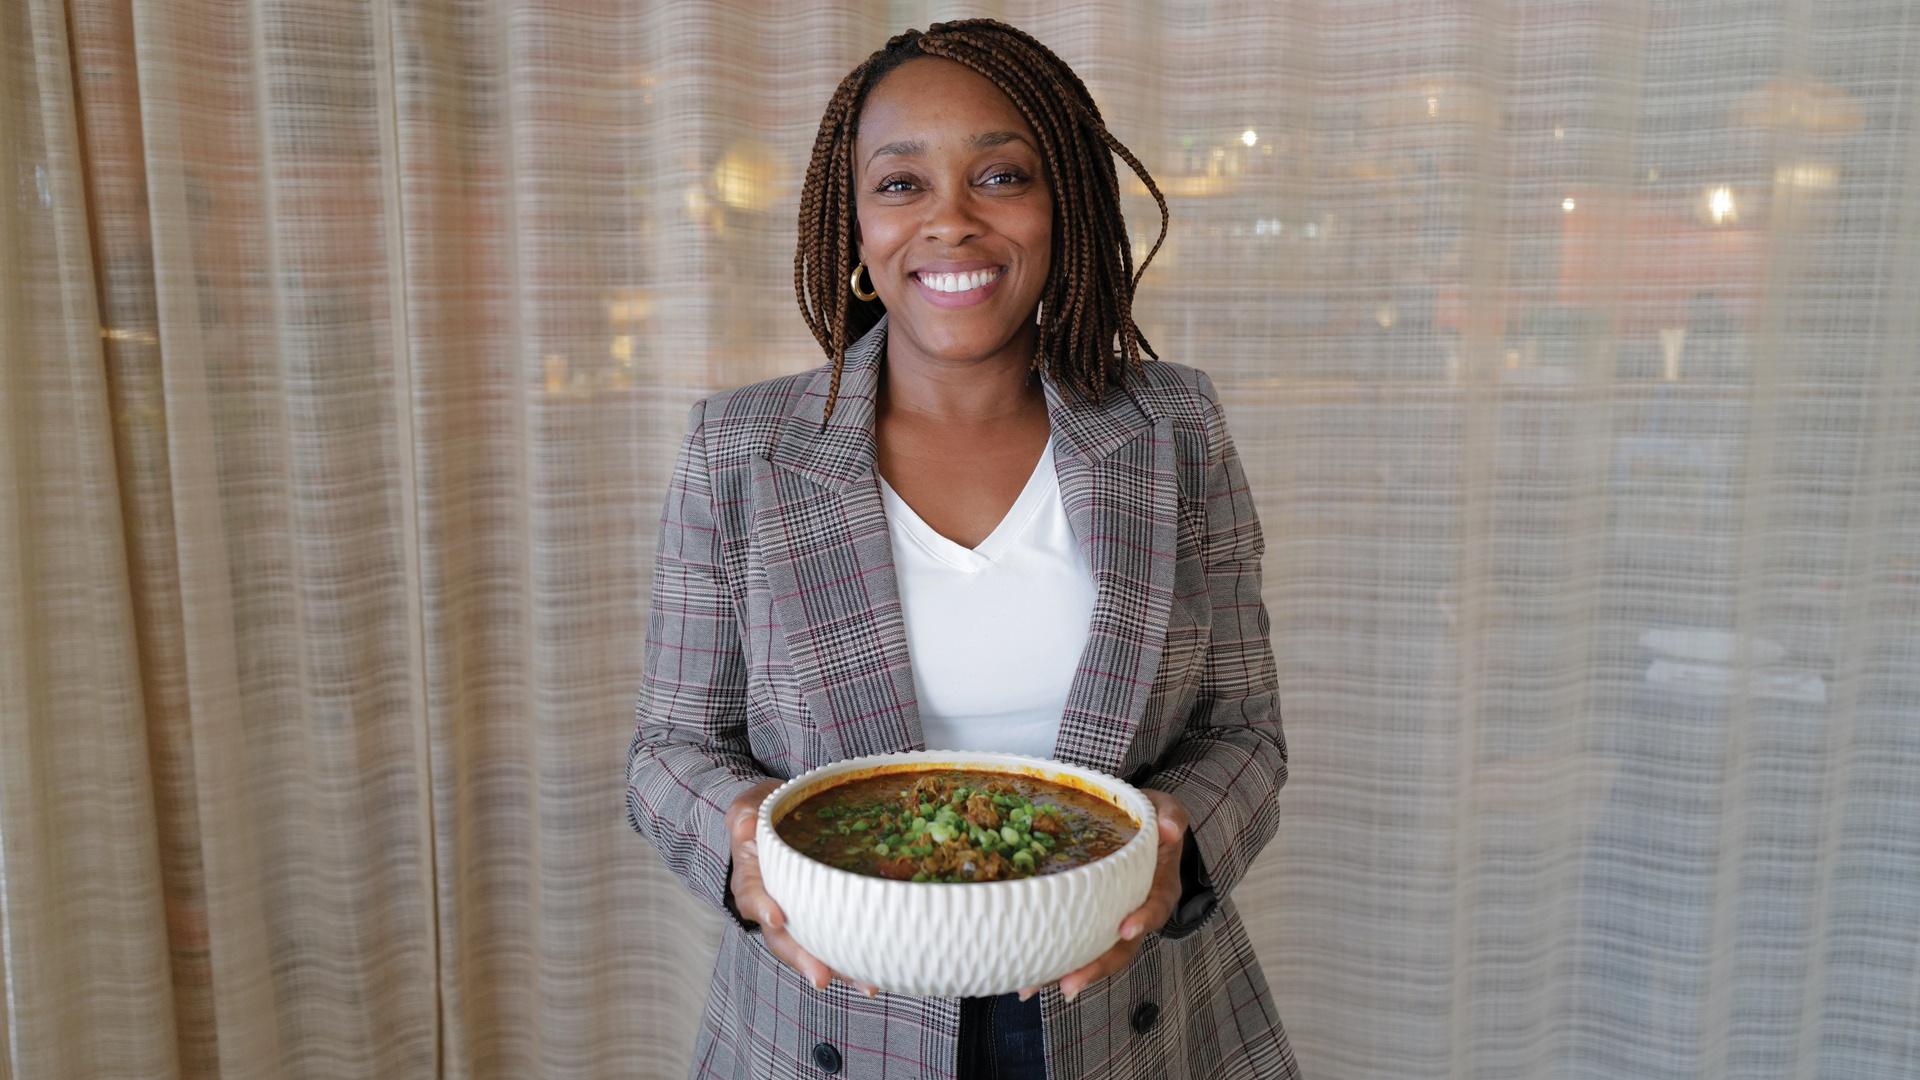 Gumbo: A Nigerian and American Southern Comfort Food Style